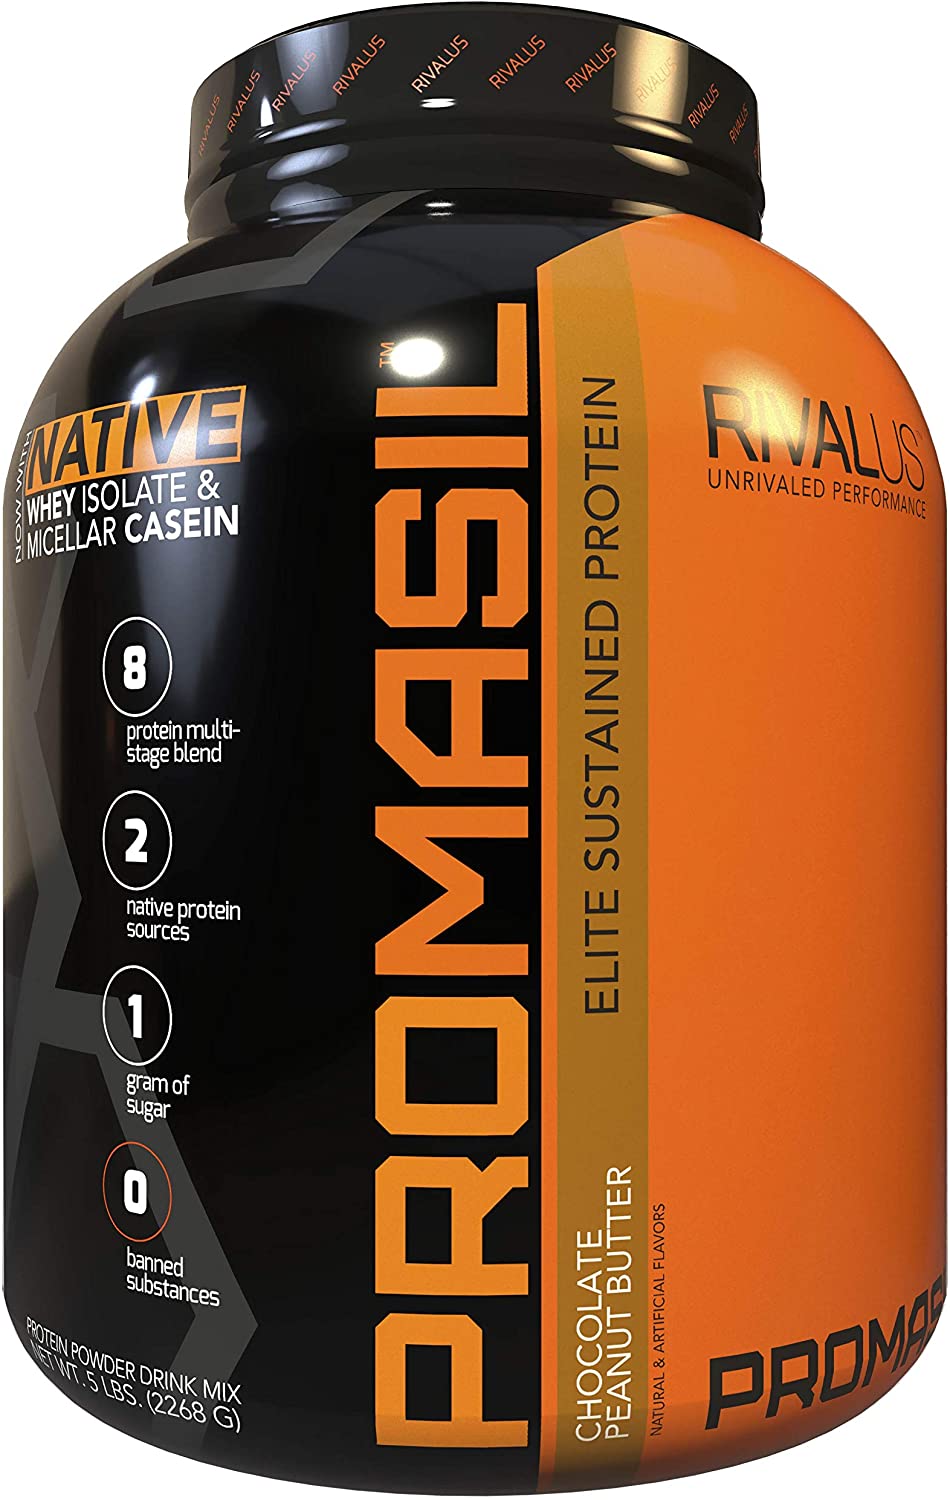 Rivalus Promasil Protein Chocolate Peanut Butter / 5lbs, SNS Health, Protein Powder